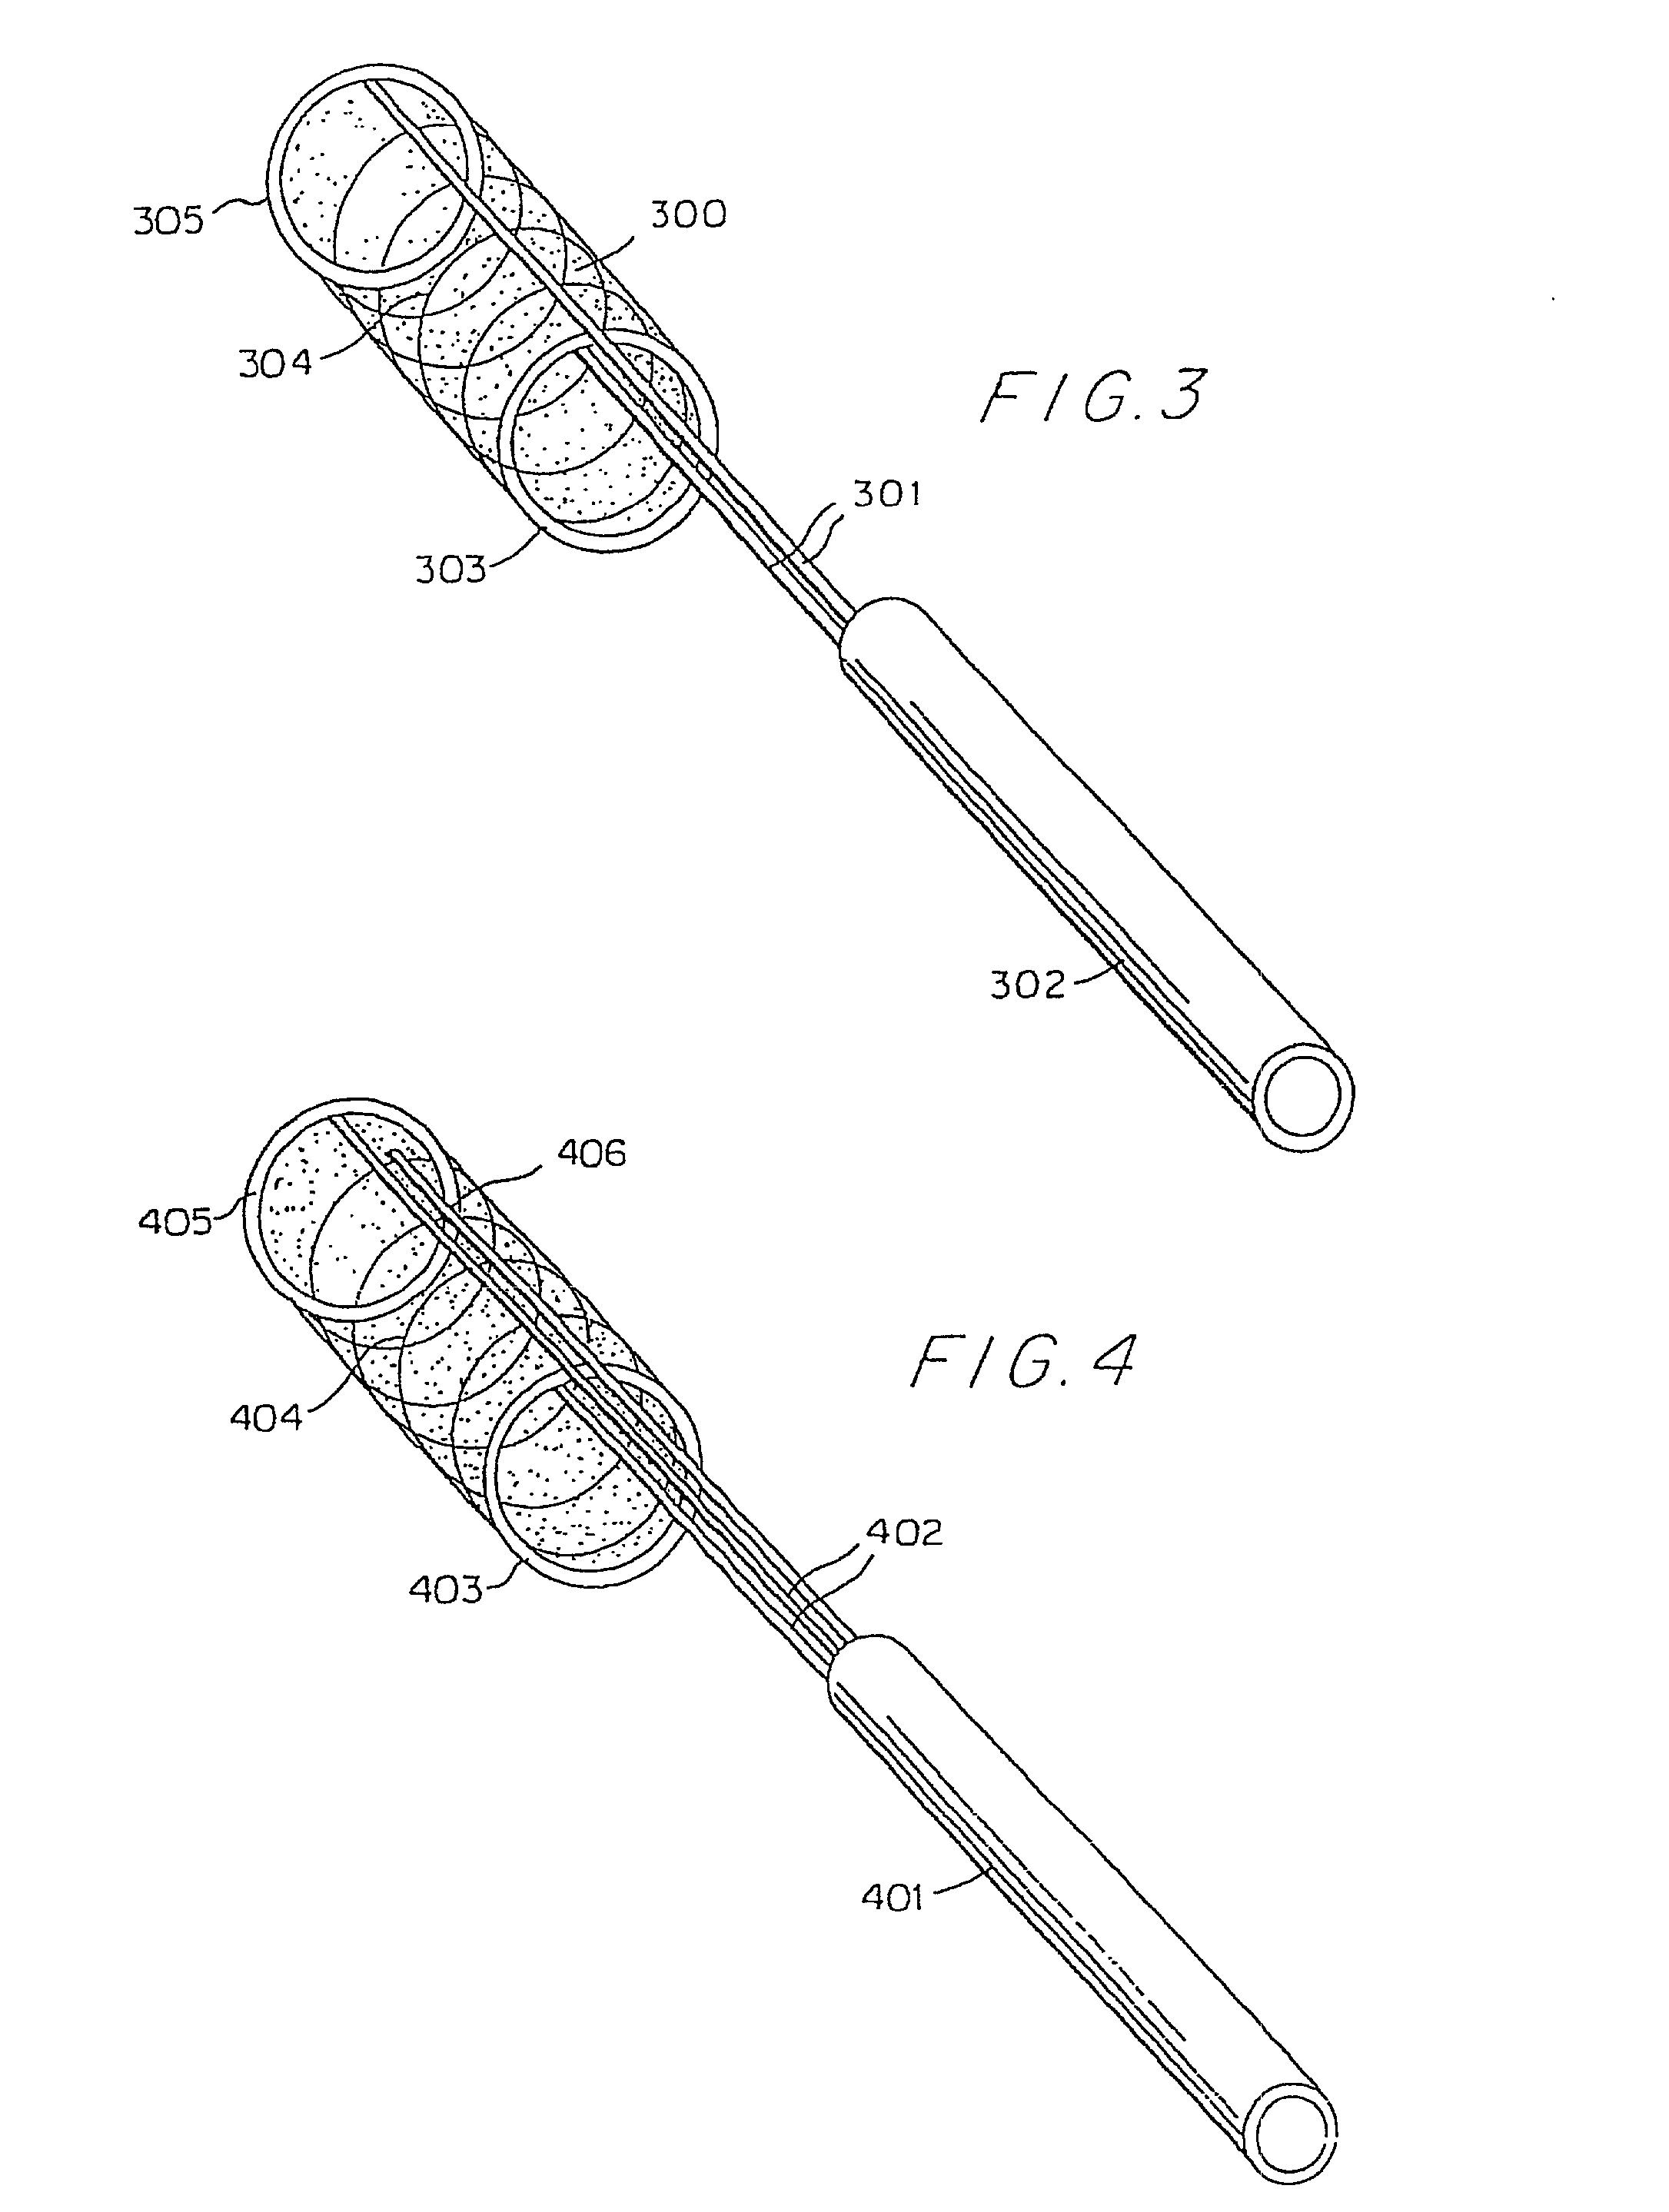 Endovascular thin film devices and methods for treating and preventing stroke